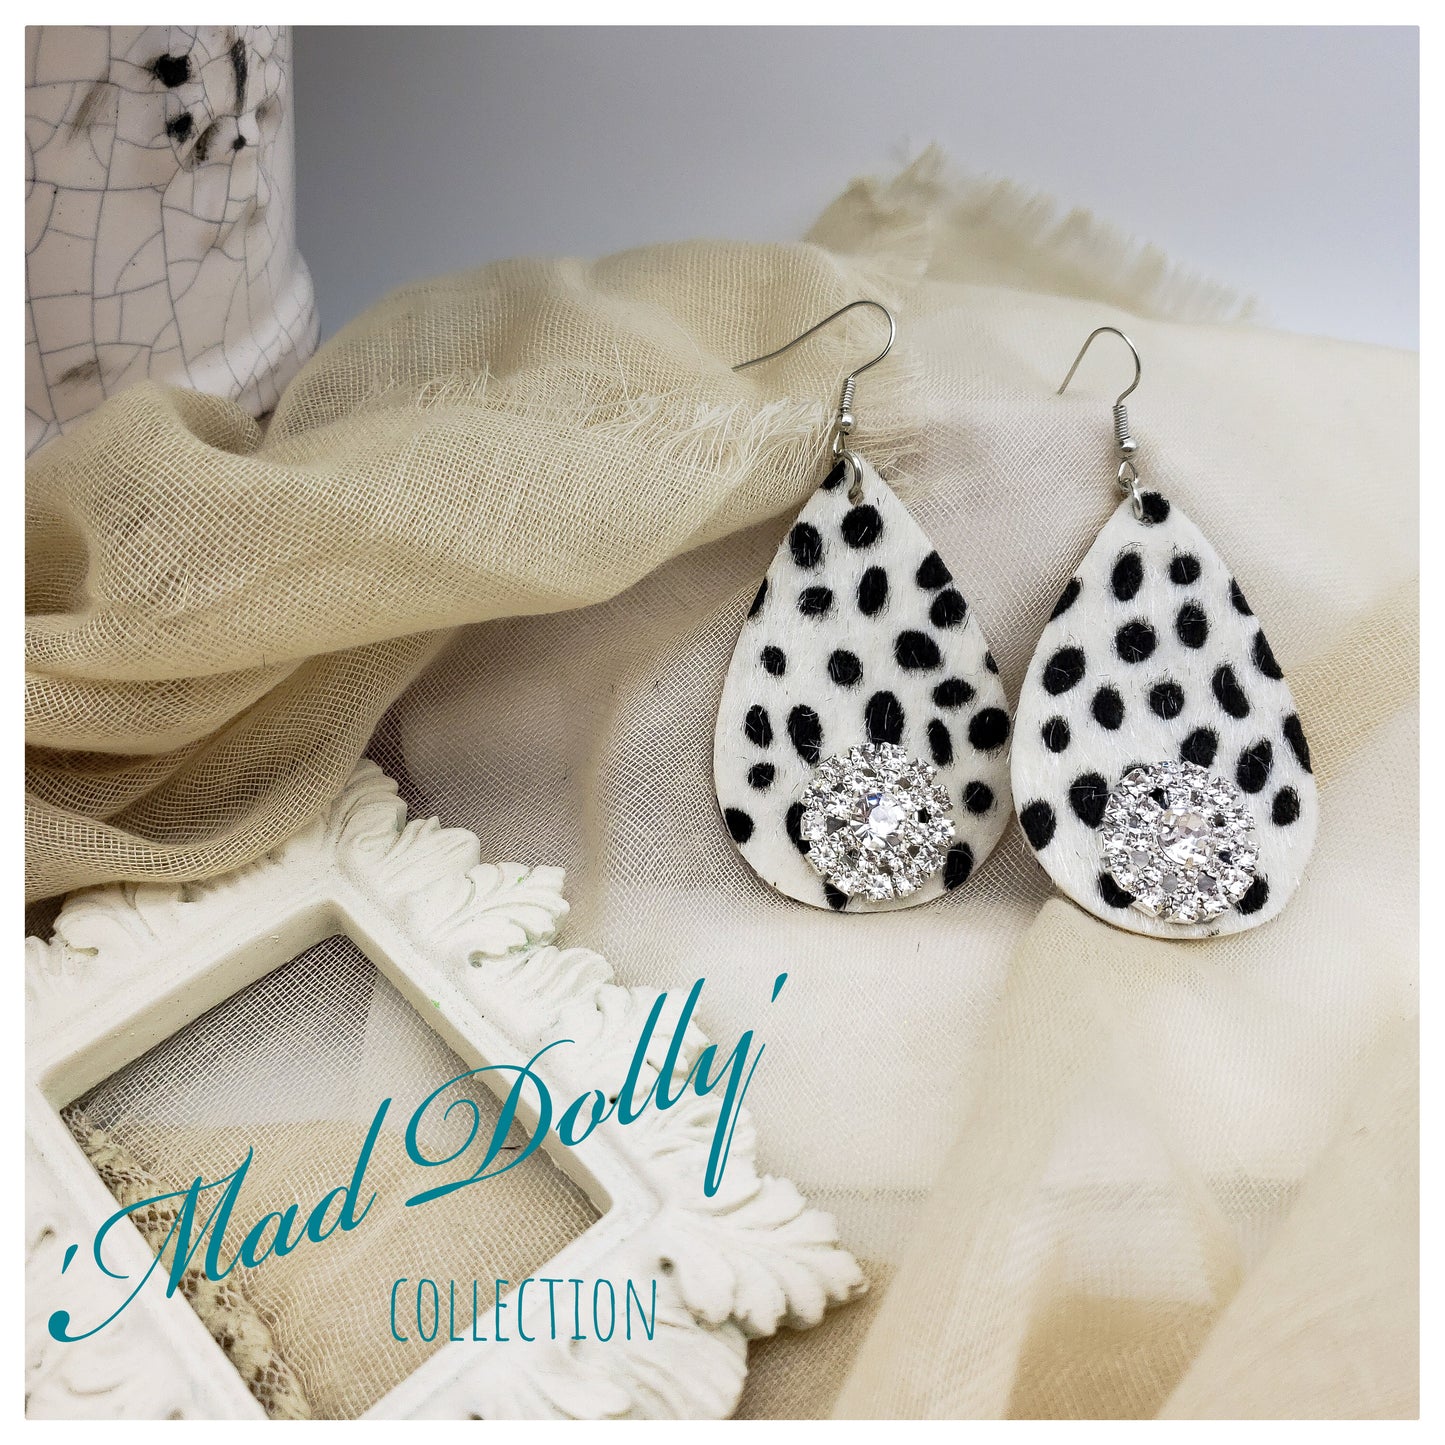 'Mad Dolly' Collection